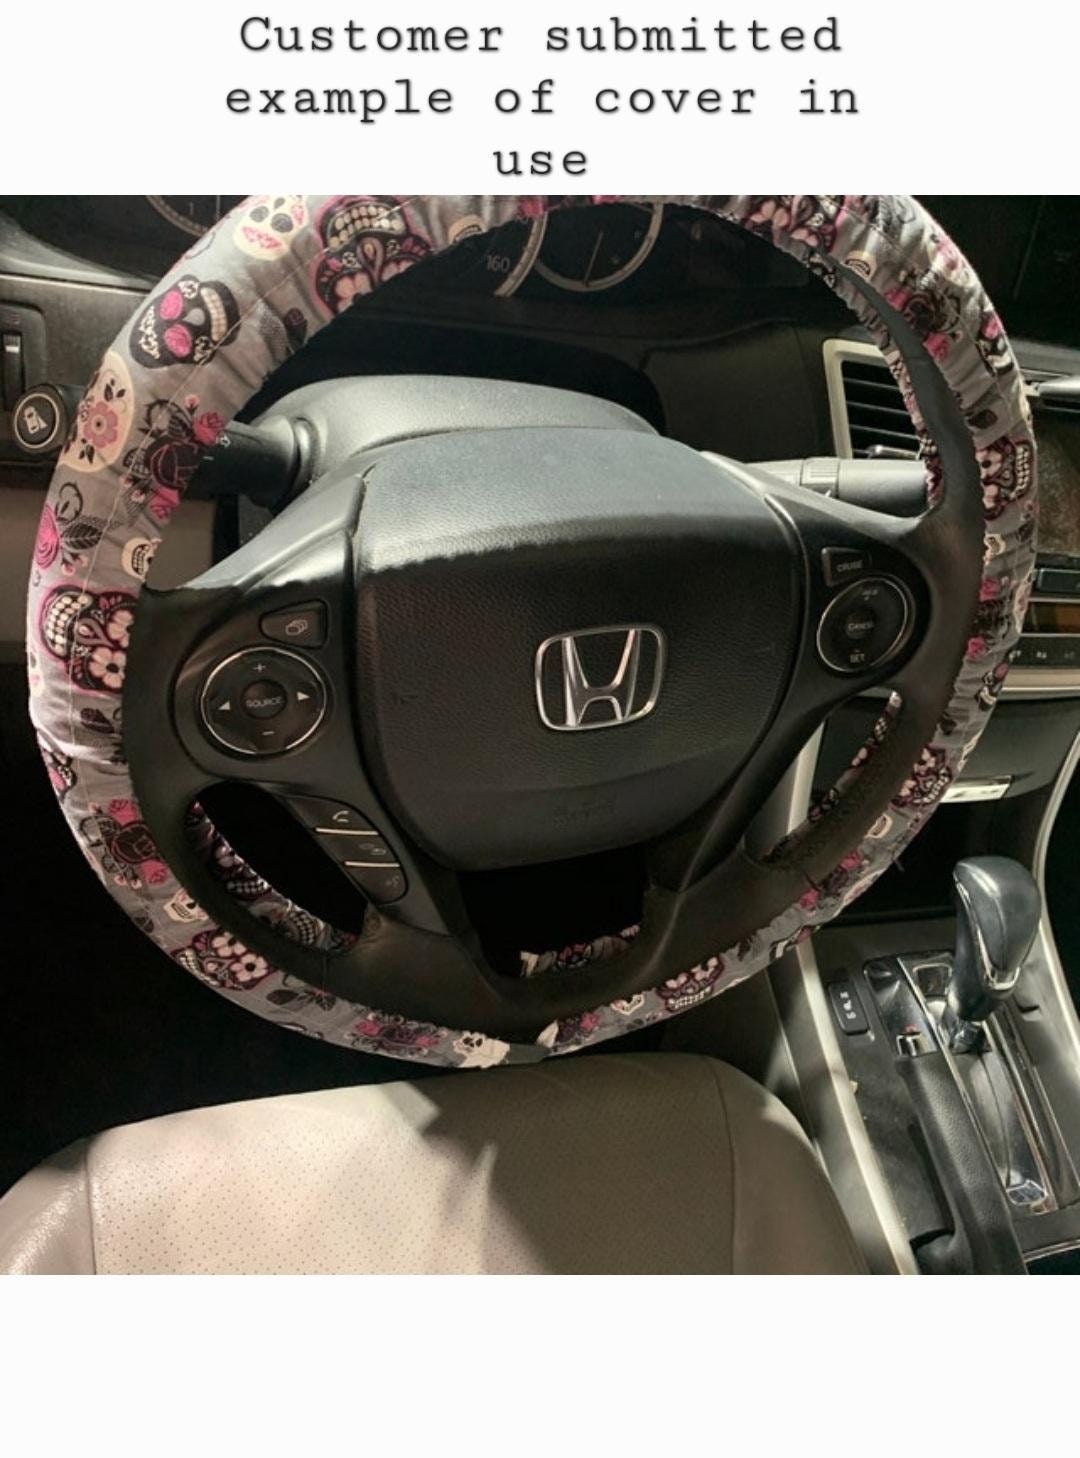 Jack NBC Steering Wheel Cover made with Licensed Disney Fabric - Harlow's Store and Garden Gifts